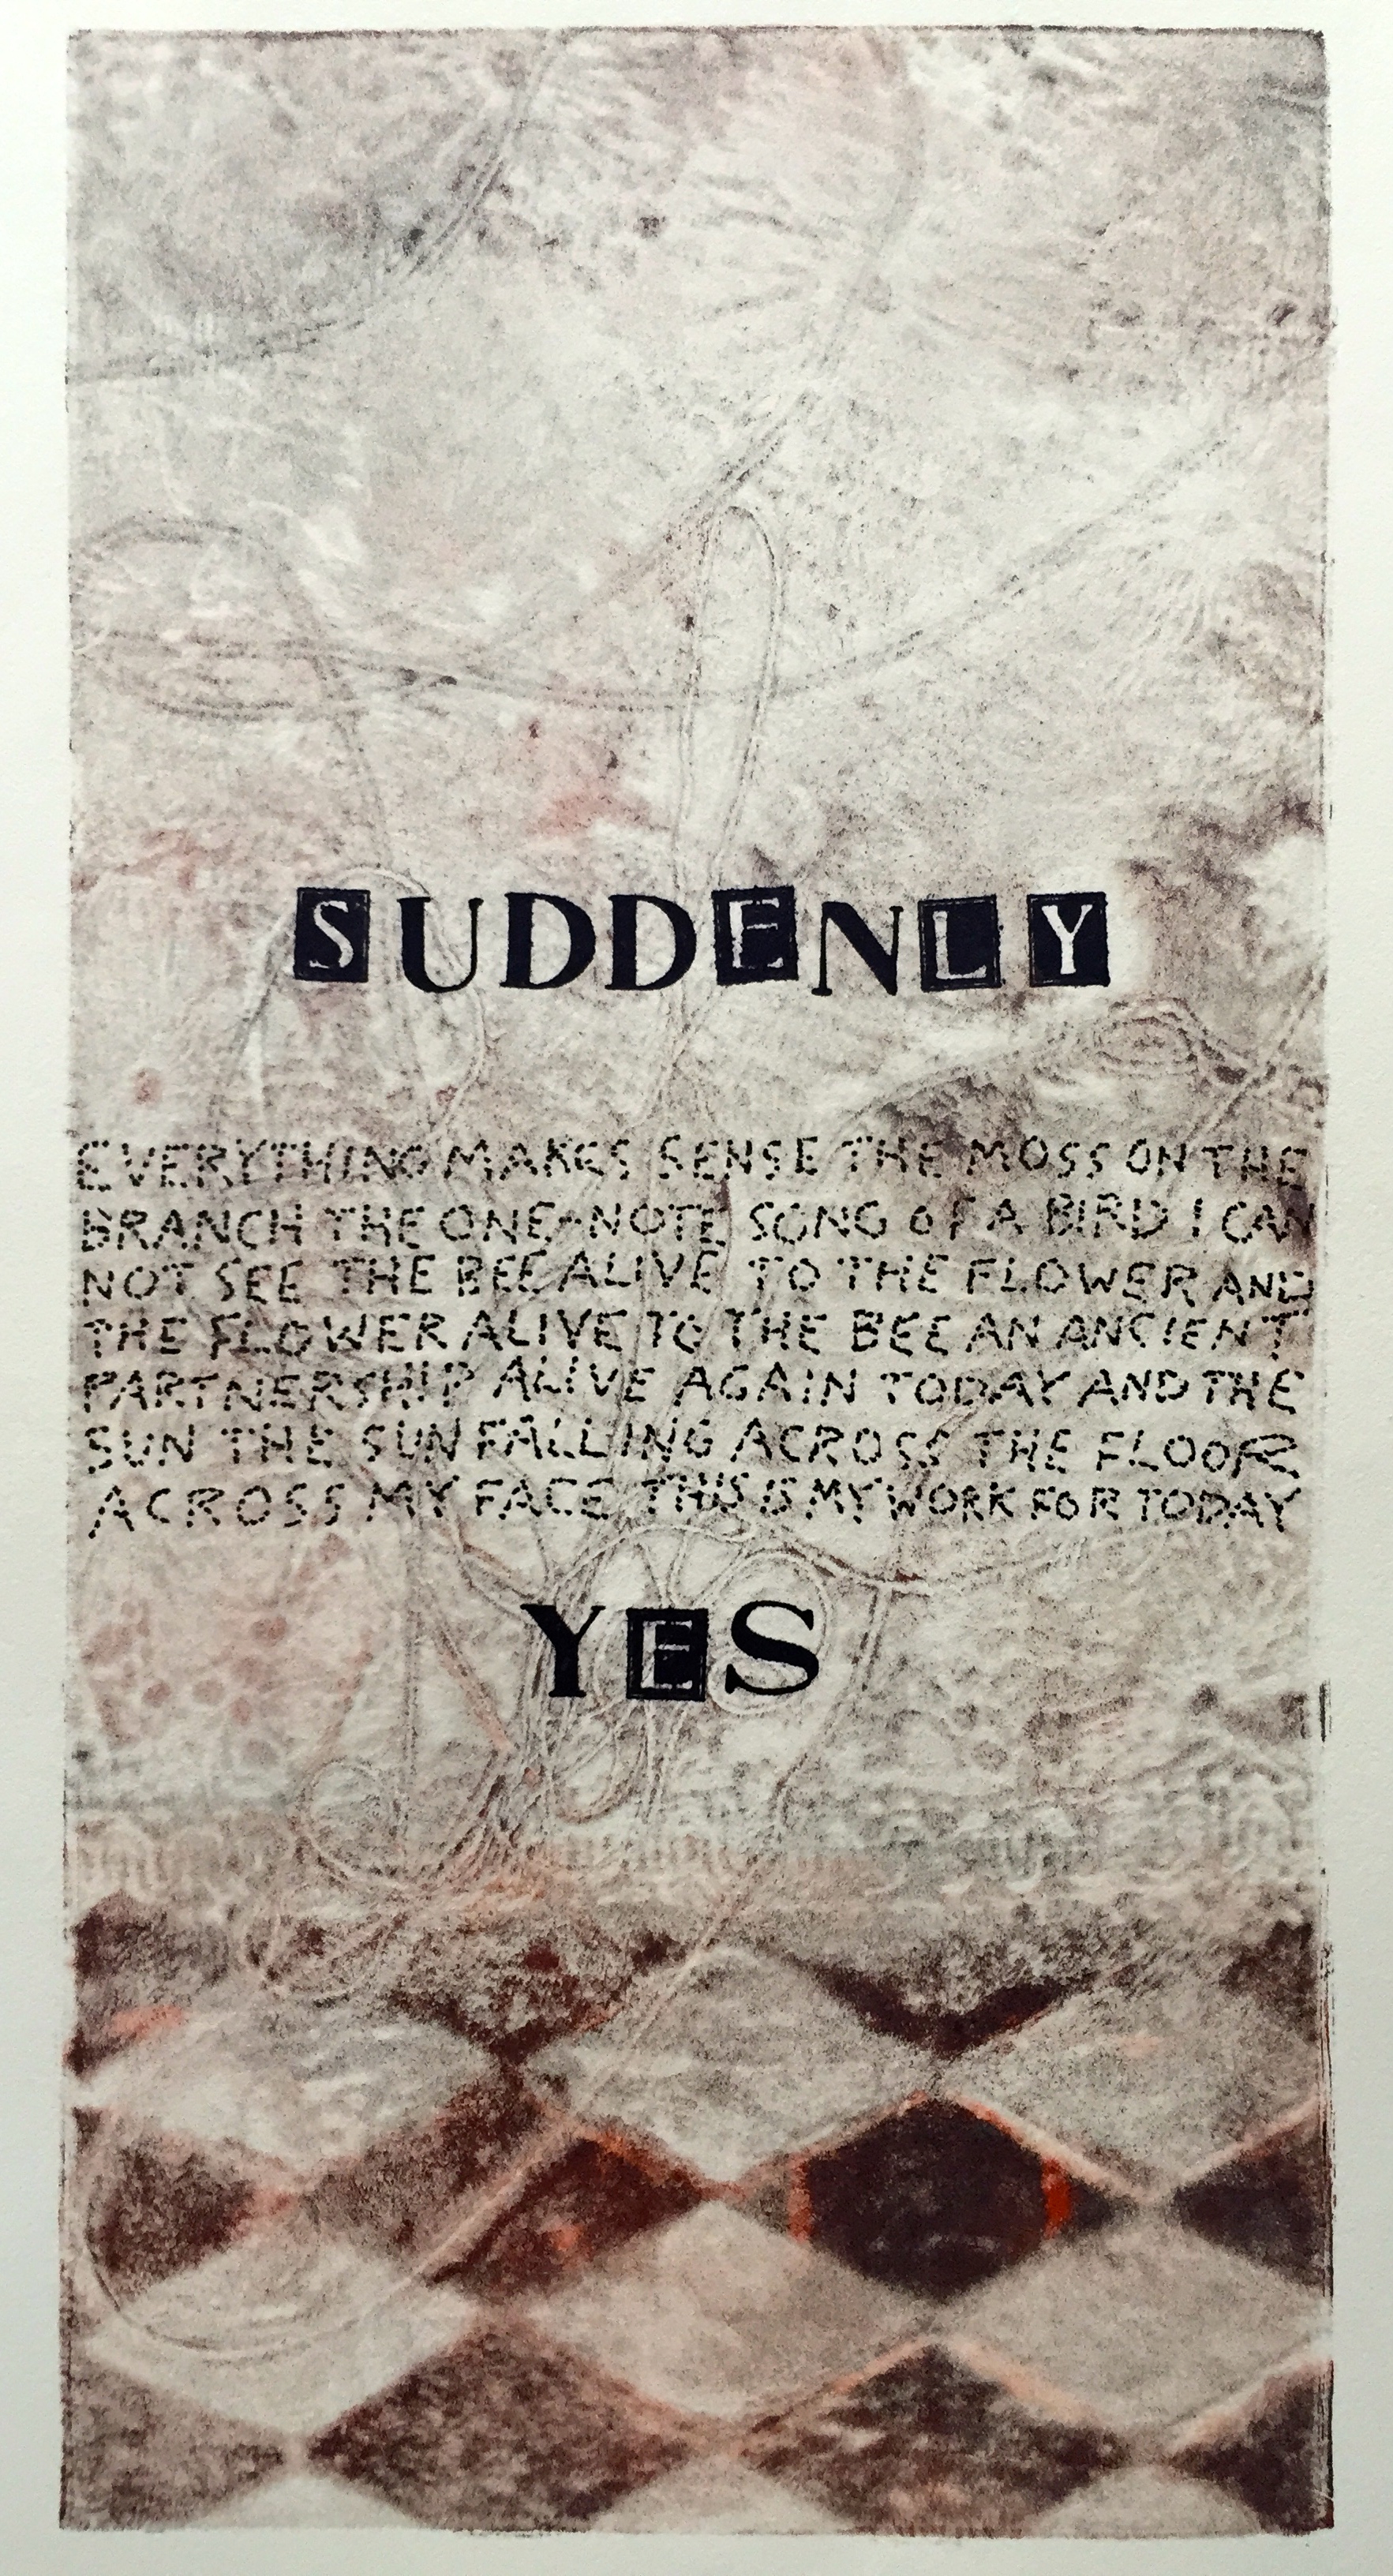   Suddenly Yes   6 x 12 inches  mixed media  image: Susan Webster  hand written and stamped&nbsp;text: Stuart Kestenbaum  2015 